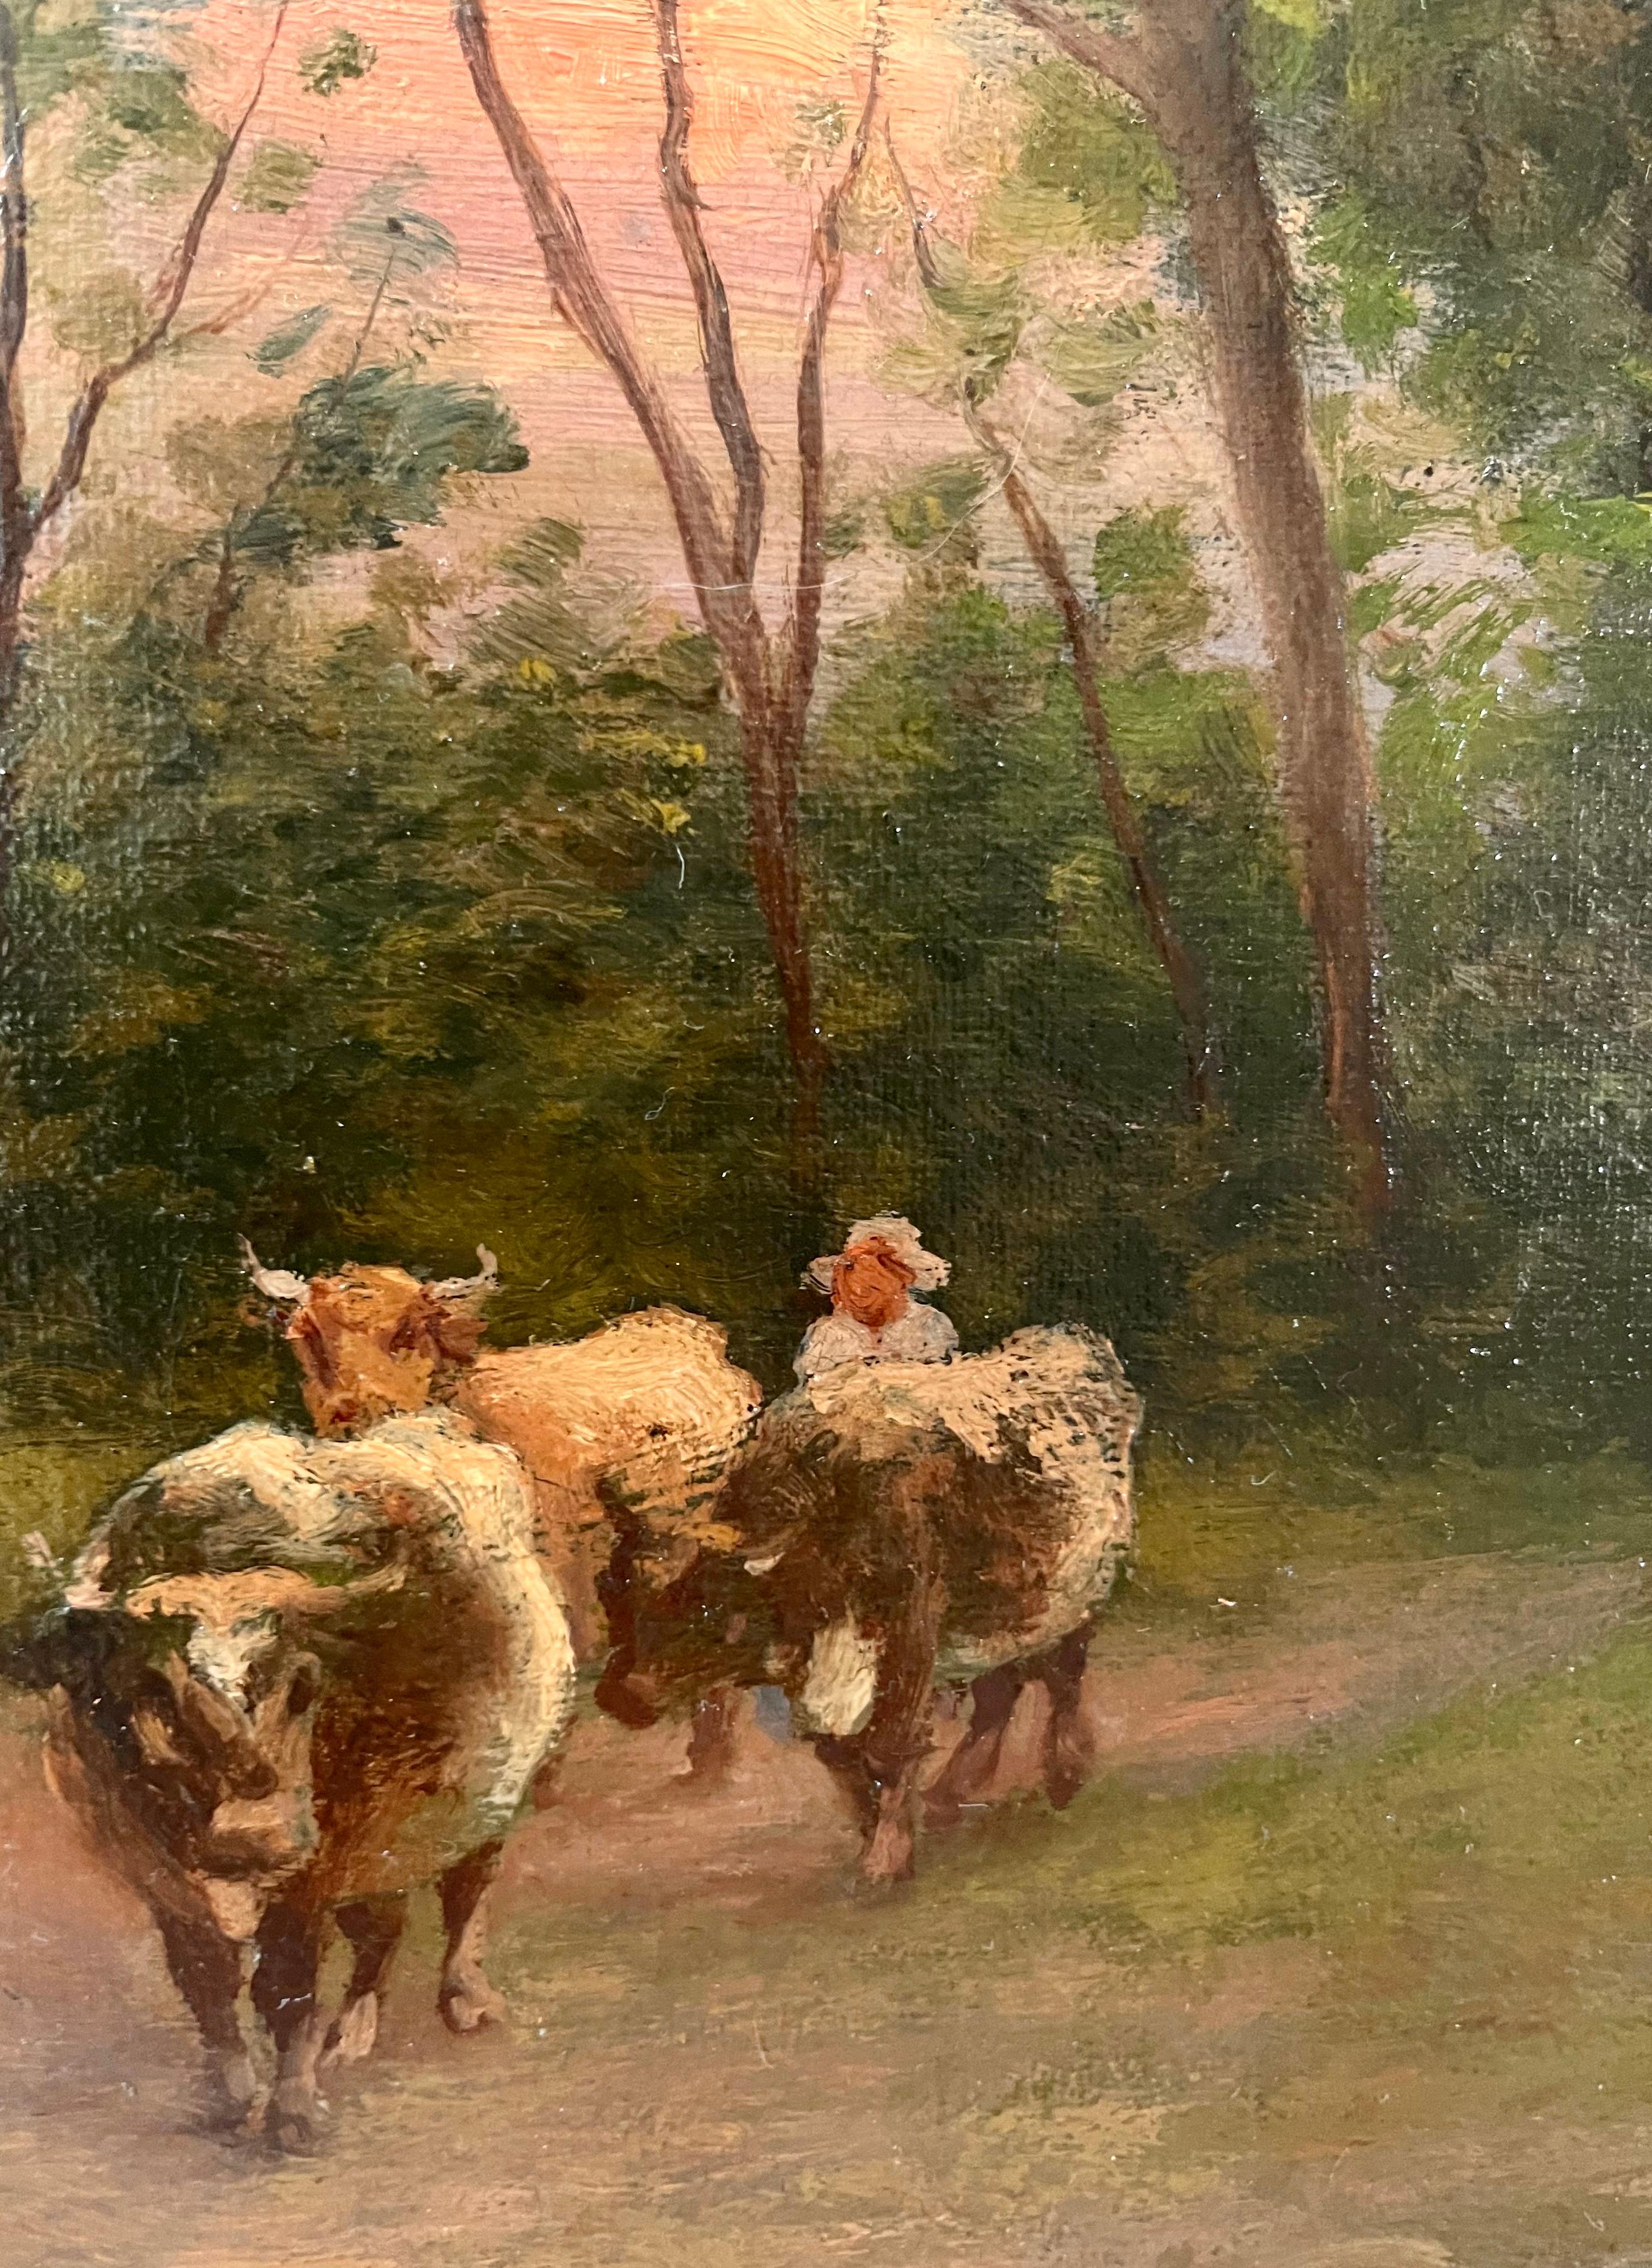 Romantic 19th century Italian countryside landscape of a shepherd by Camillo Innocenti

This peaceful countryside landscape depicts a shepherd returning home with his flock at sunset. The setting sun beautifully illuminates the sky and covers the